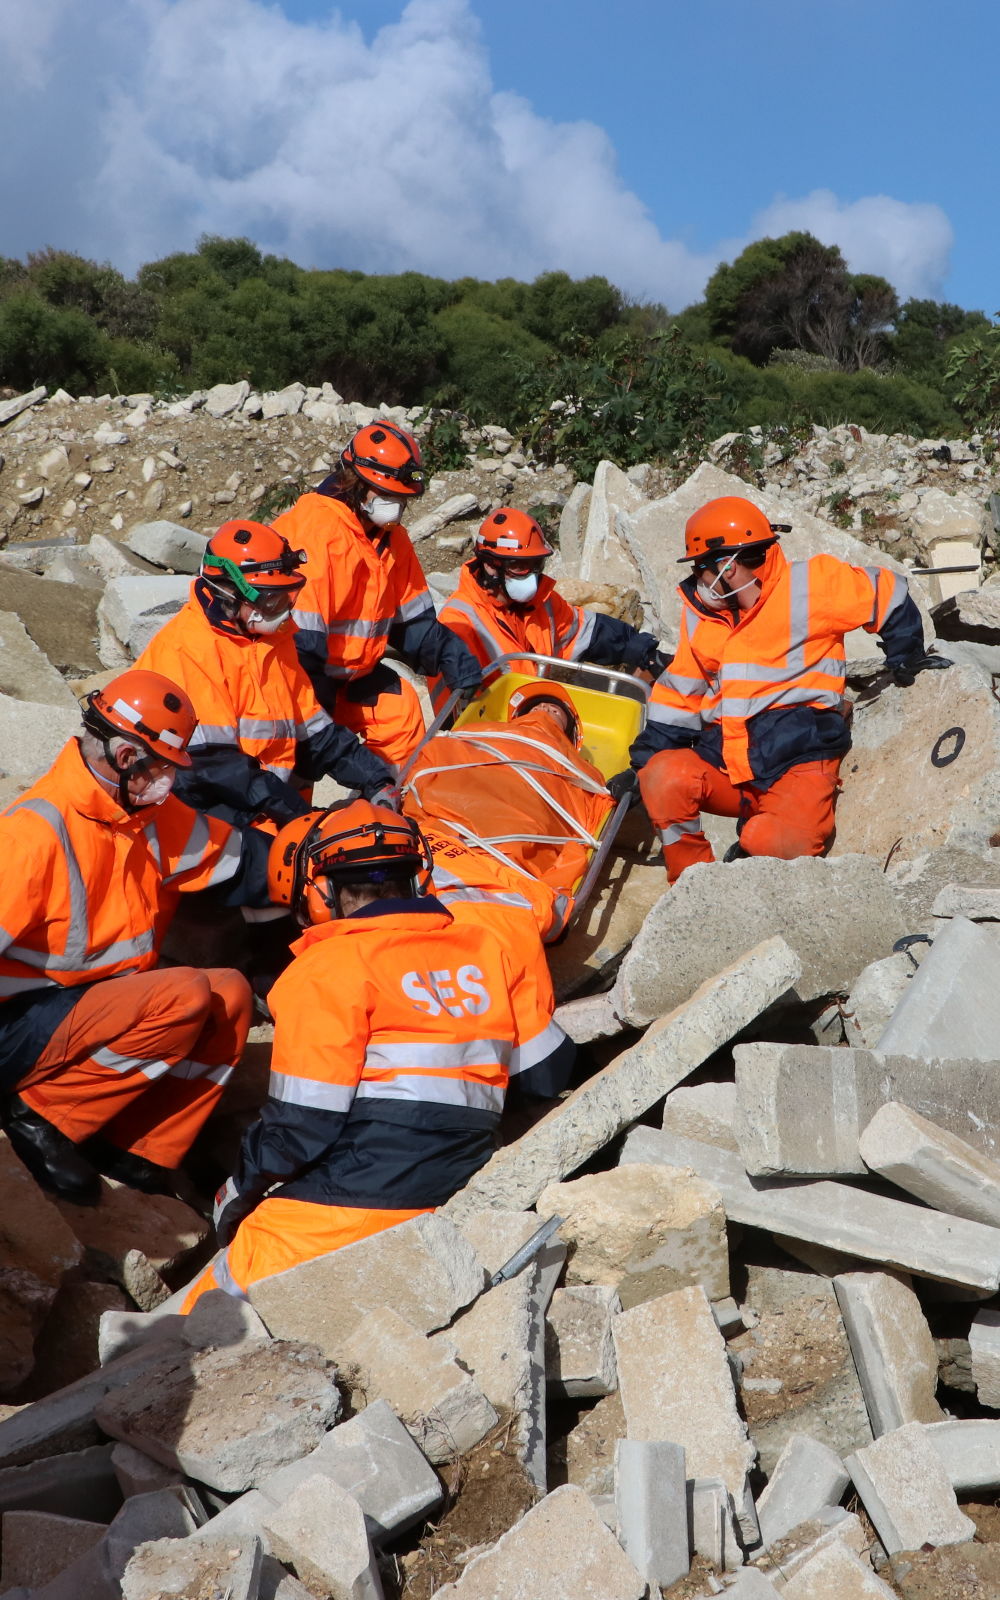 USAR Team Rescuing a Person